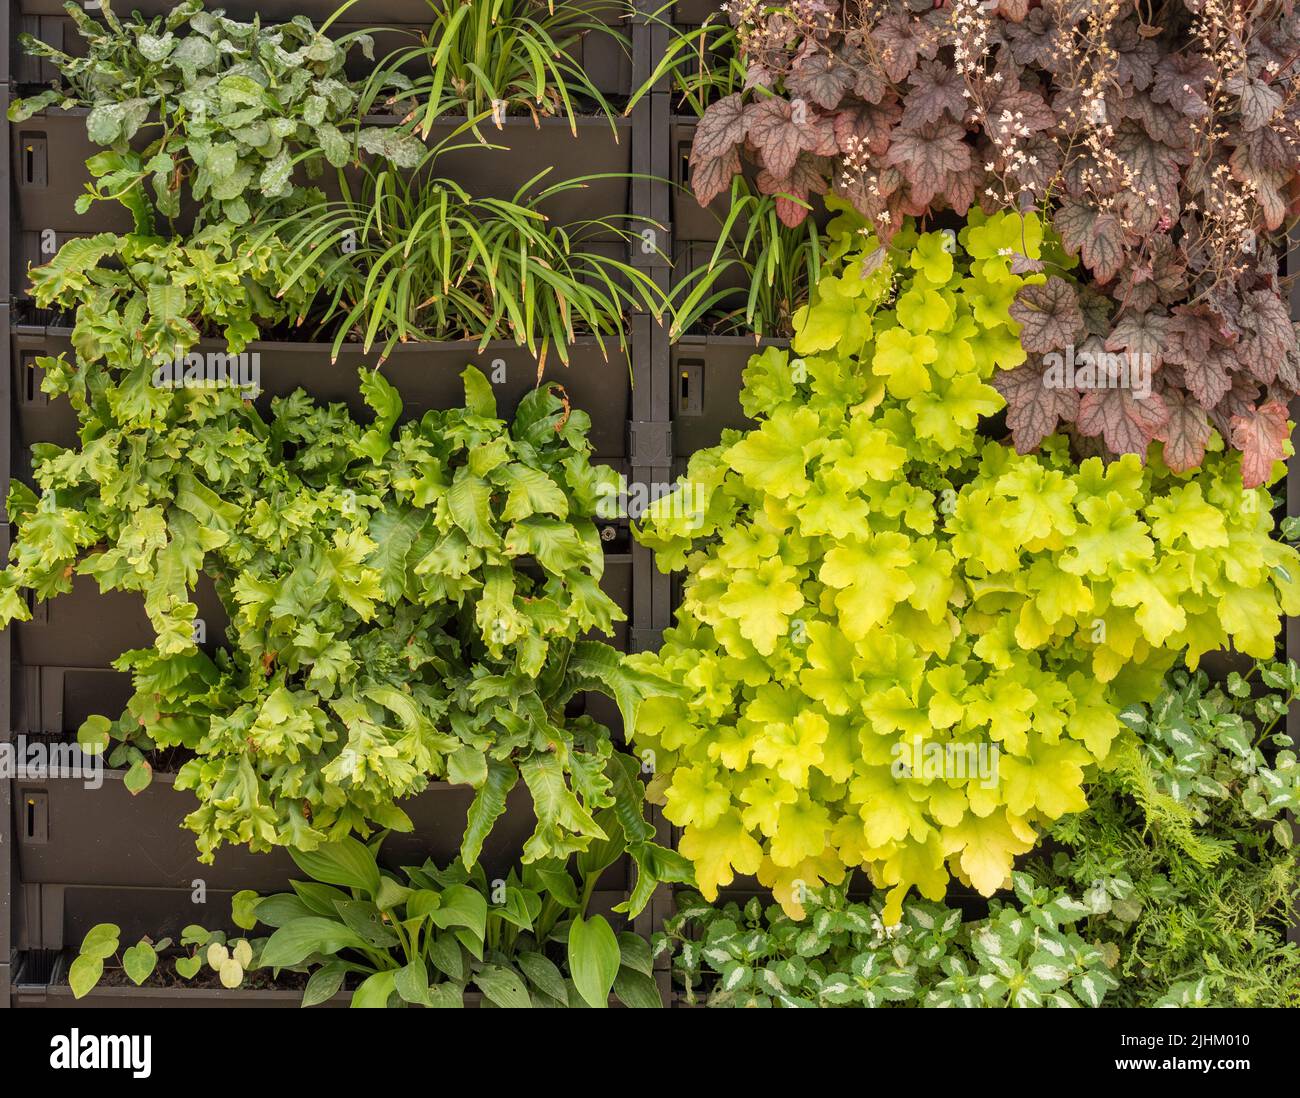 Vertical gardening. Plastic troughs attached to an outdoor wall, planted up with ferns and heucheras to make a living green wall. Stock Photo